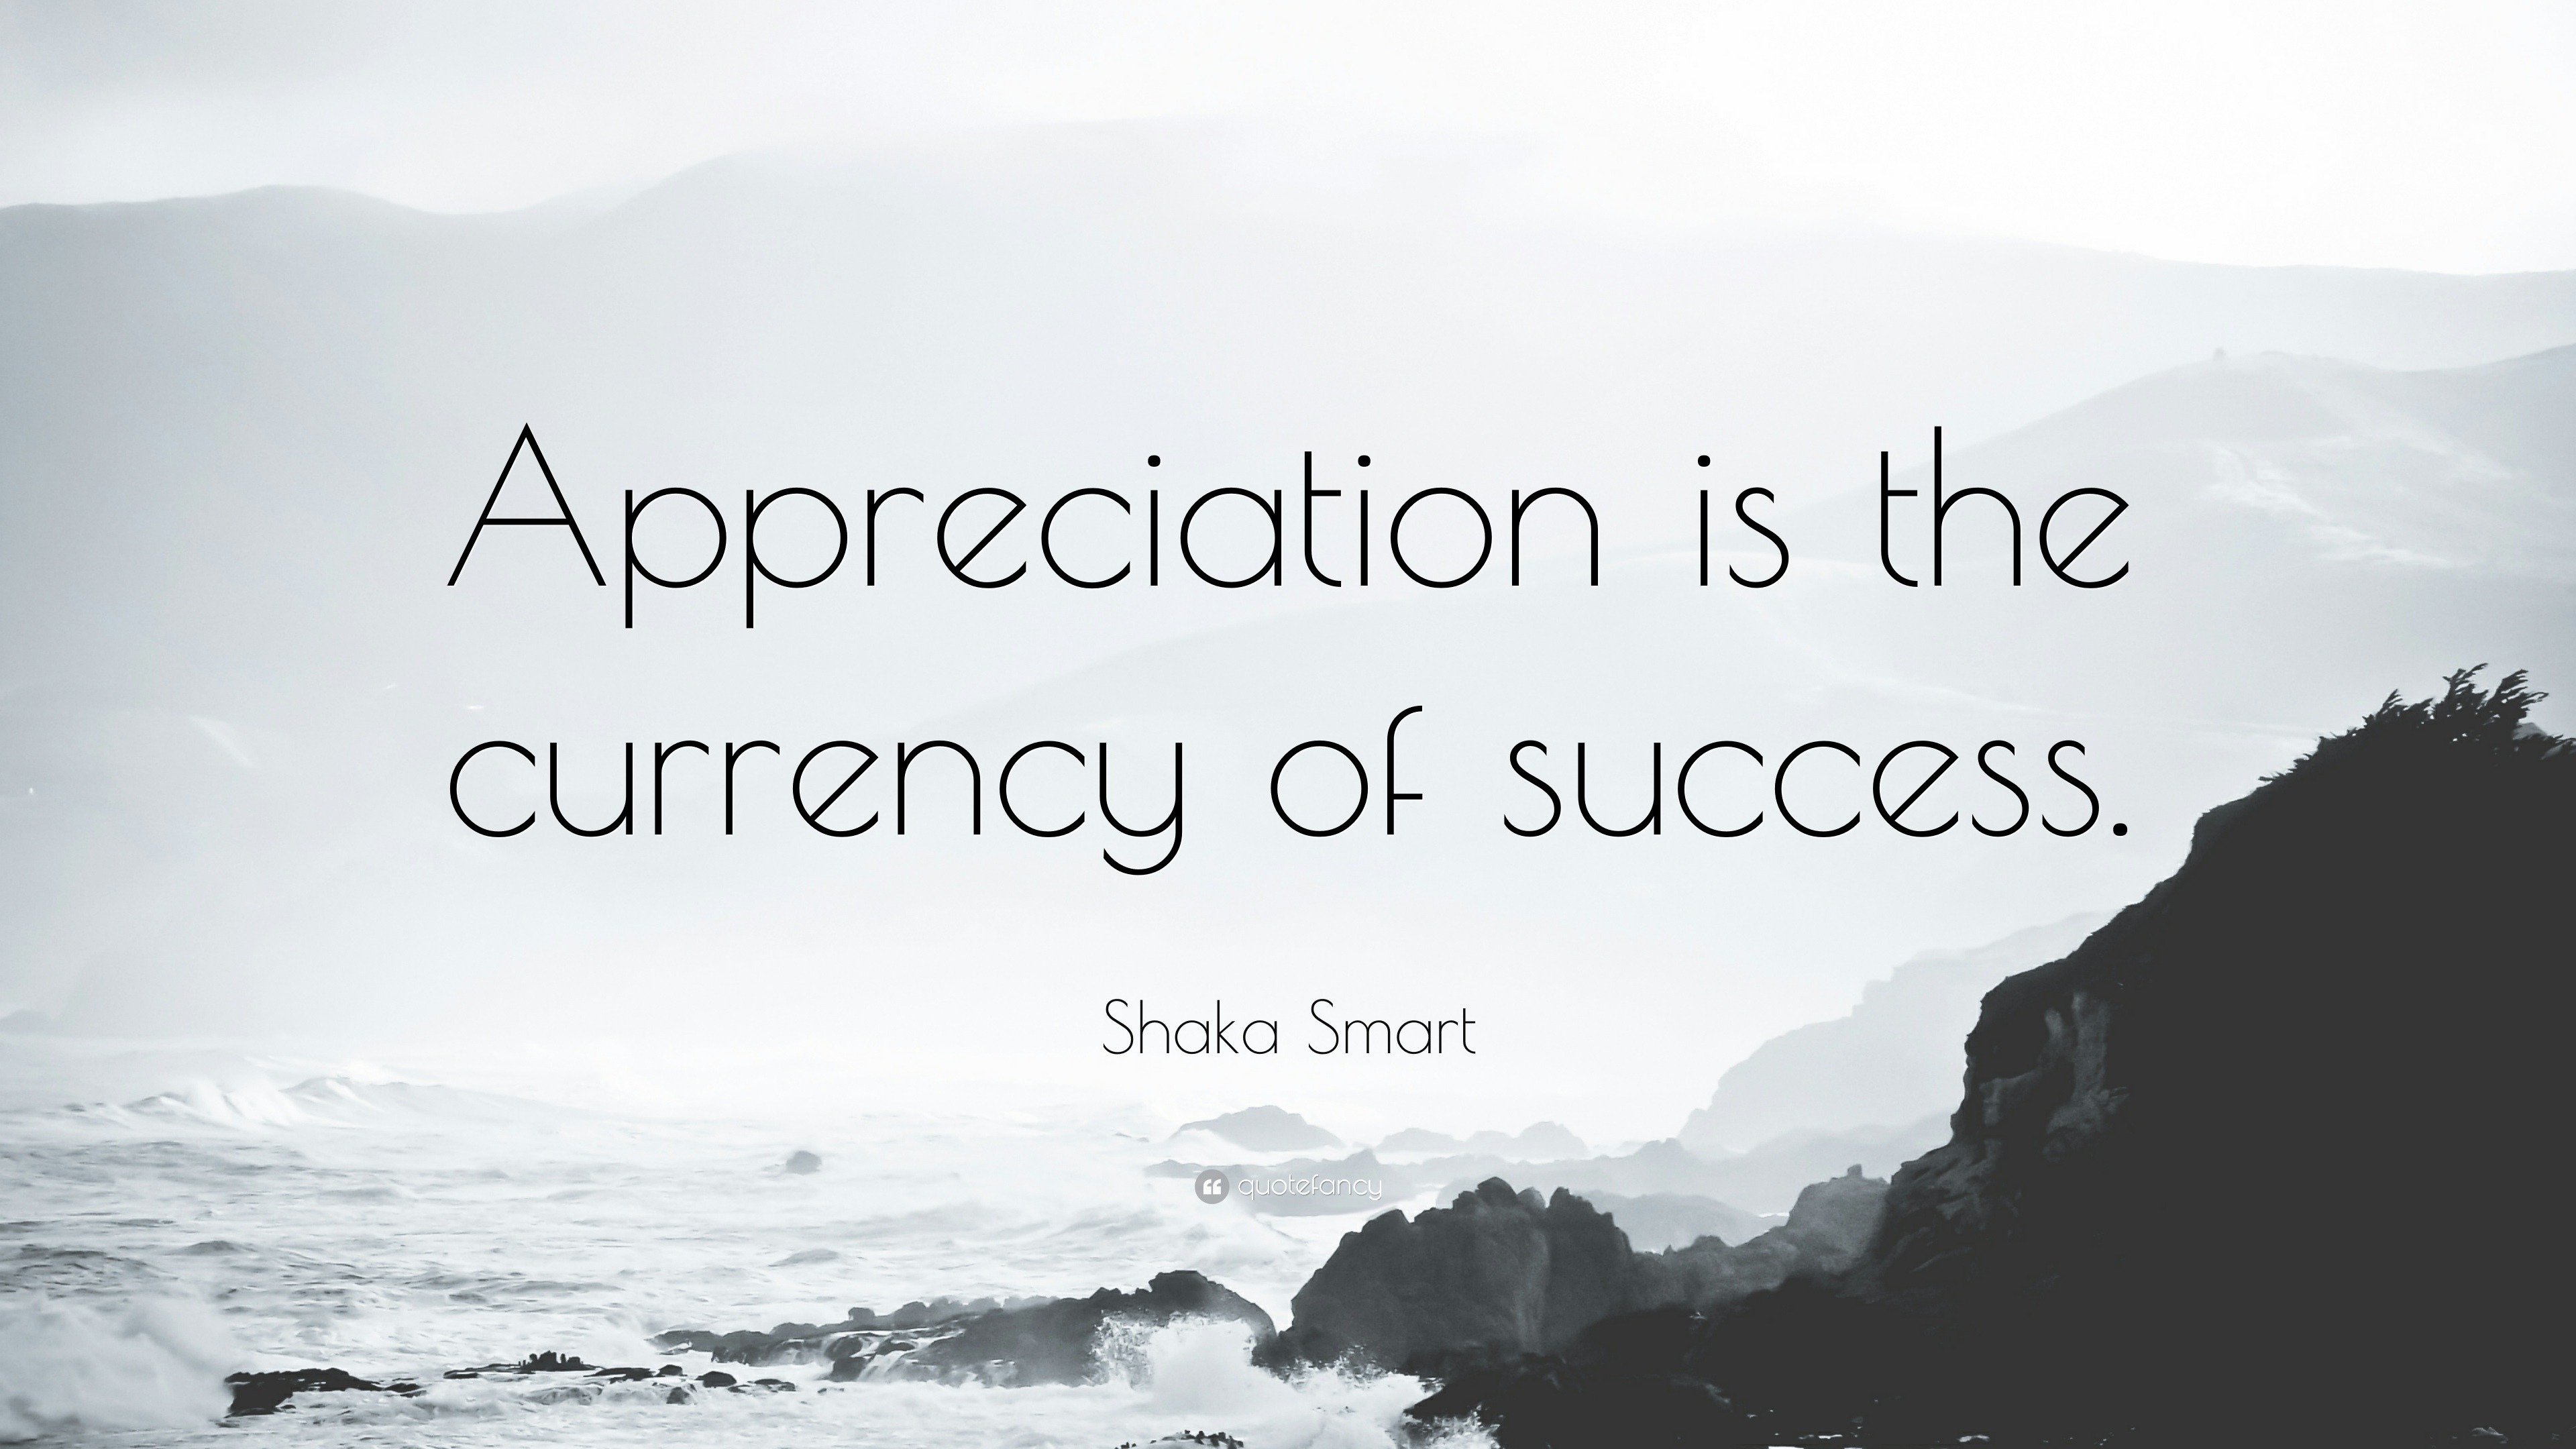 Shaka Smart Quote “Appreciation is the currency of success.”